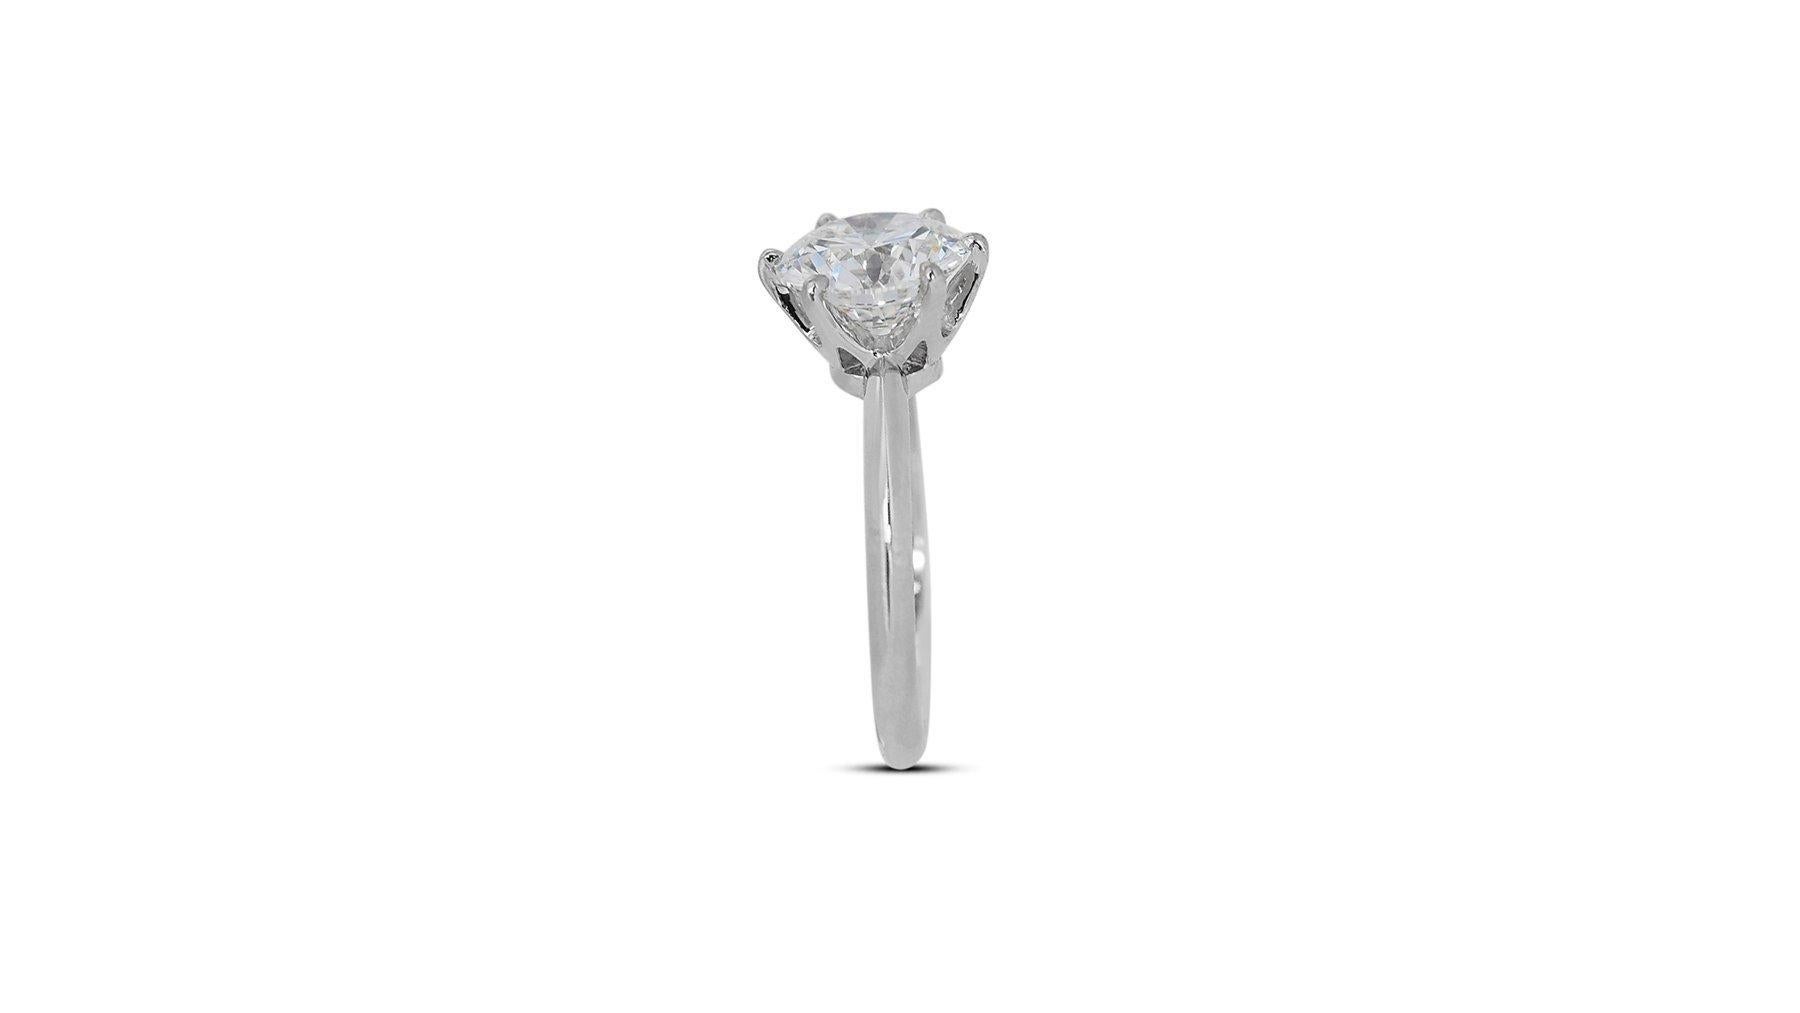 Timeless 3.09ct Diamond Solitaire Ring in 18k White Gold - GIA Certified (bague solitaire en or blanc 18 carats) Neuf - En vente à רמת גן, IL